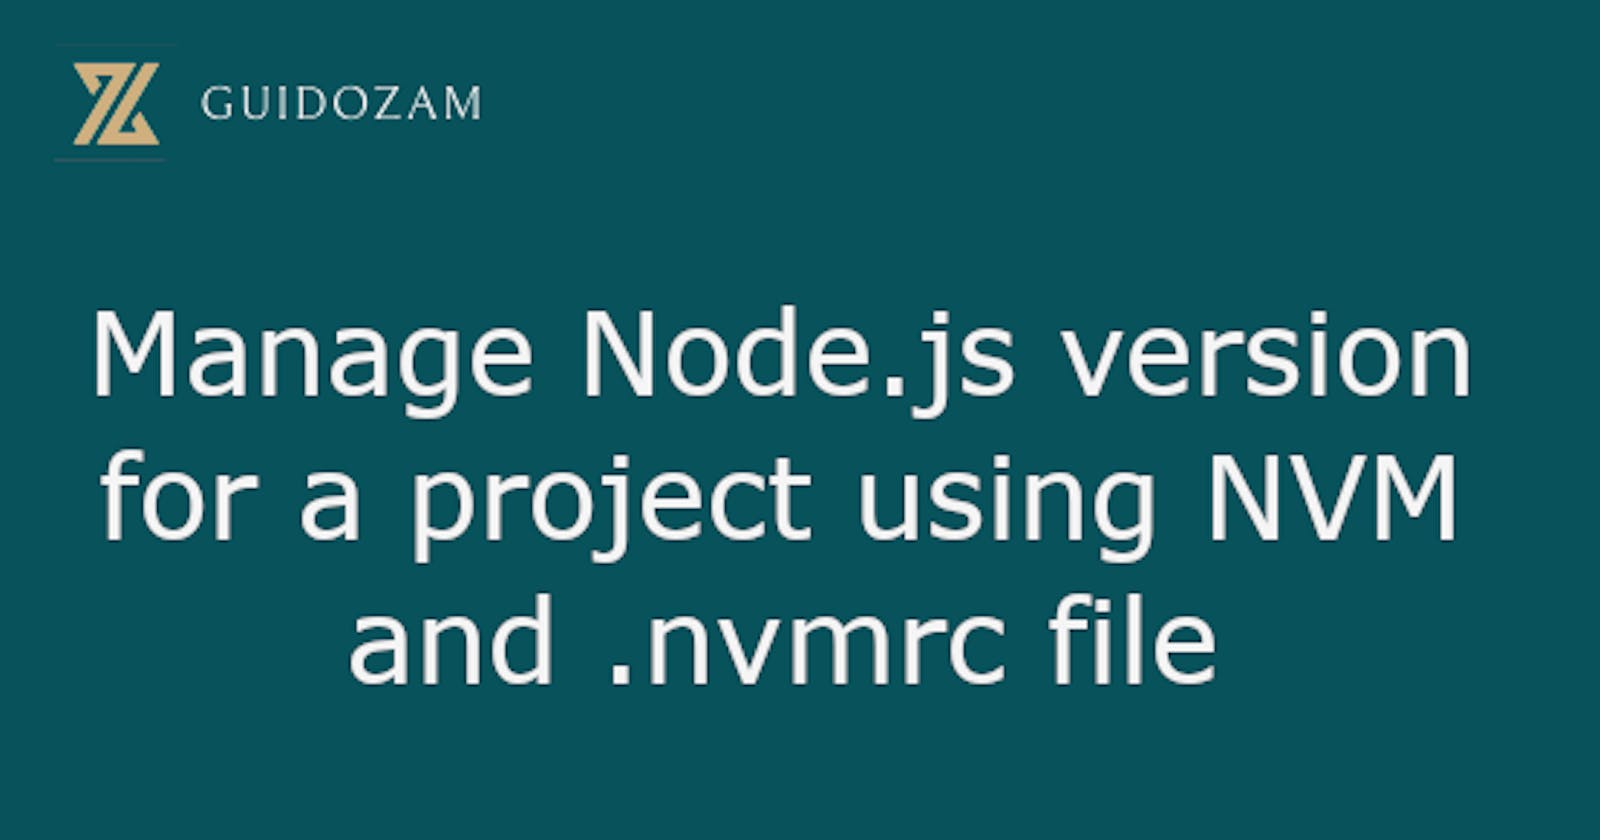 Manage Node.js version for a project using NVM and .nvmrc file